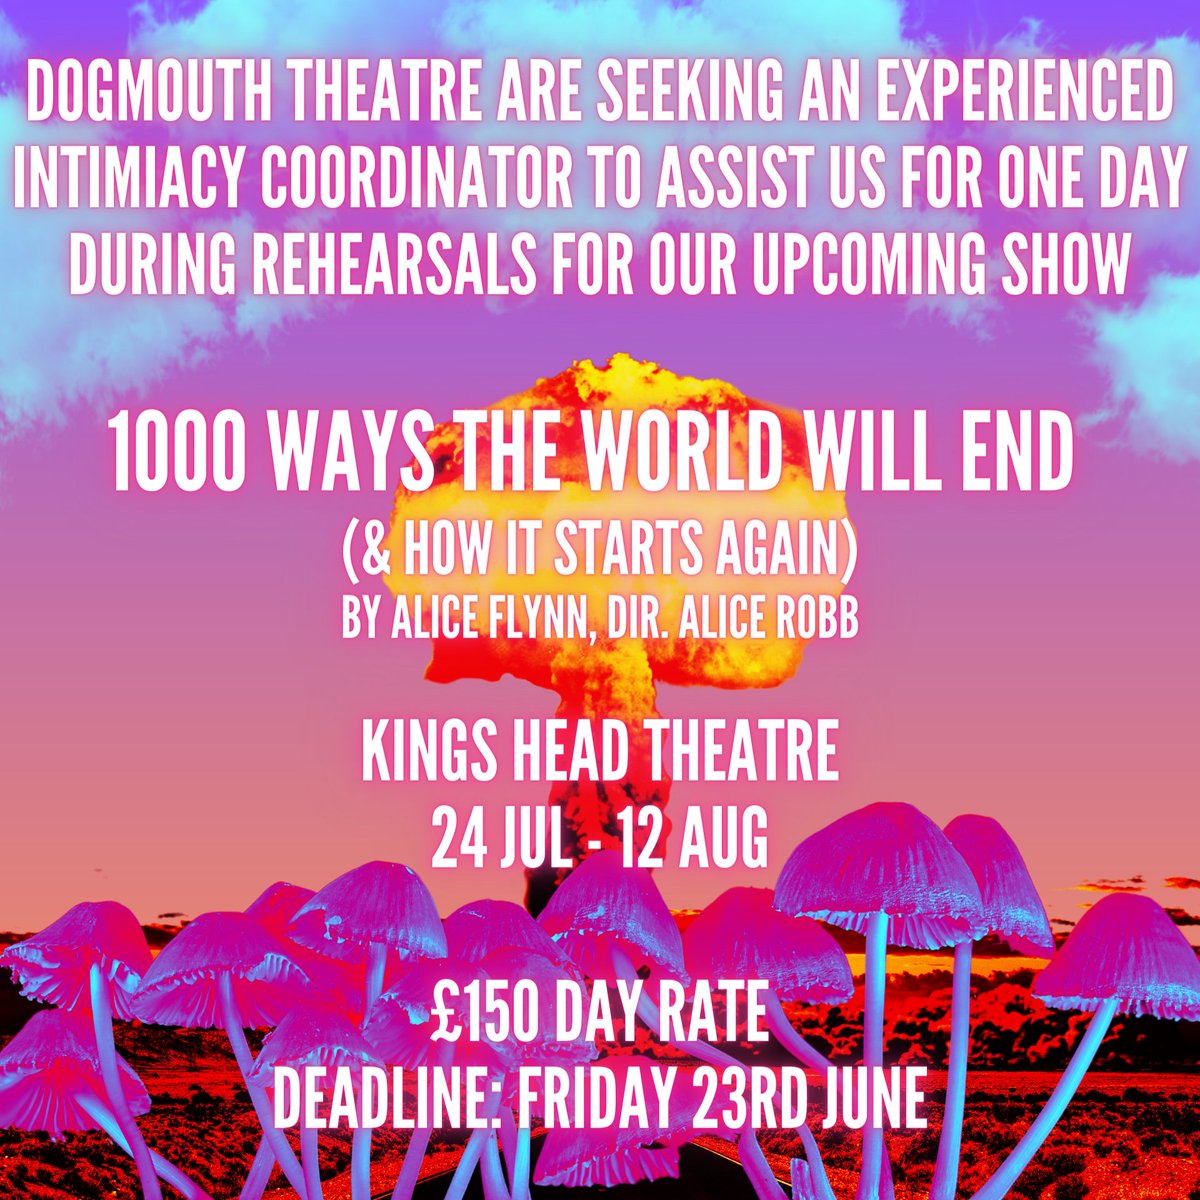 DogmouthTheatre tweet picture